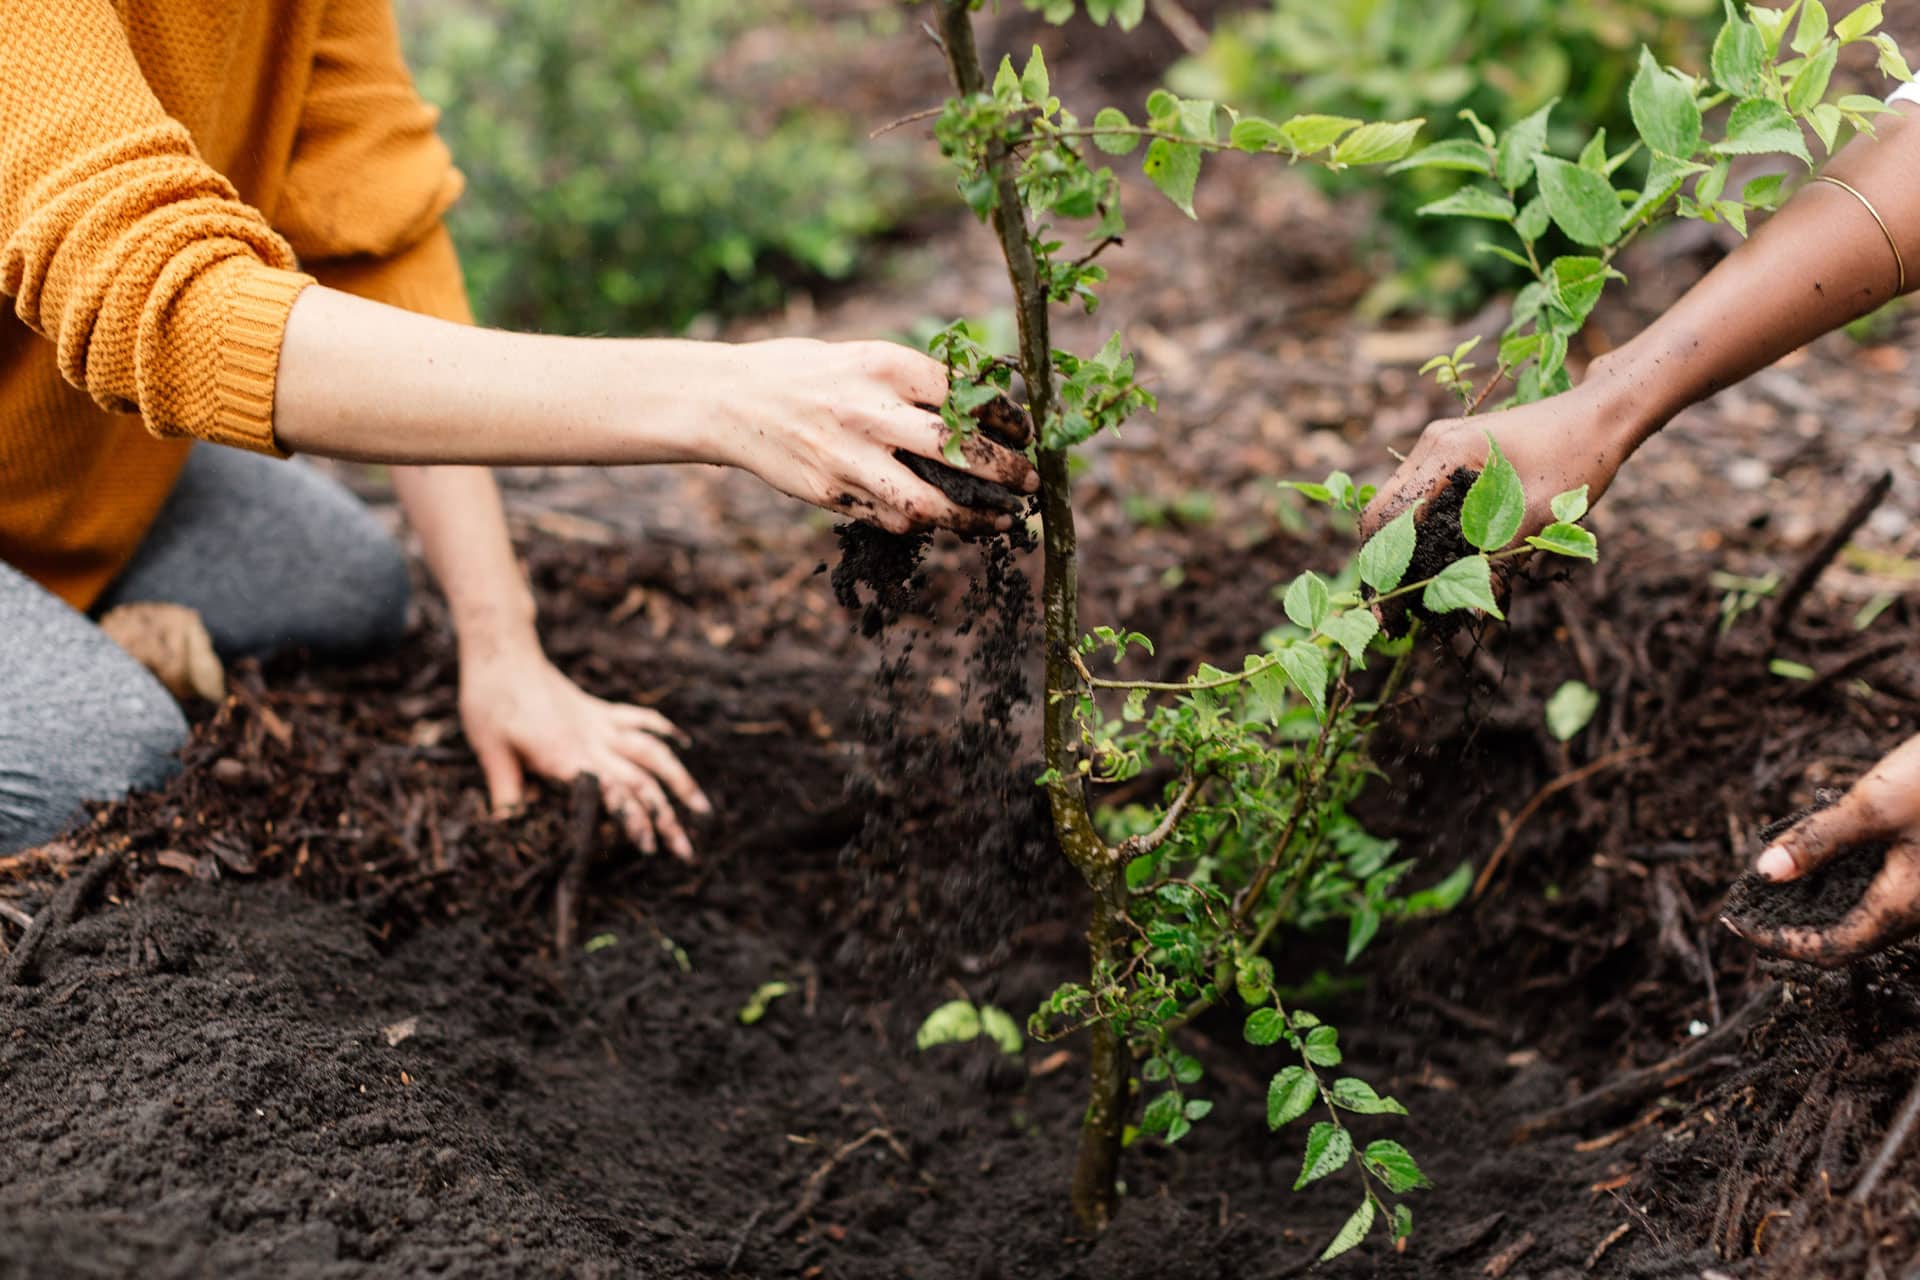 A woman’s hands in the soil planting a tree for Greenpop.